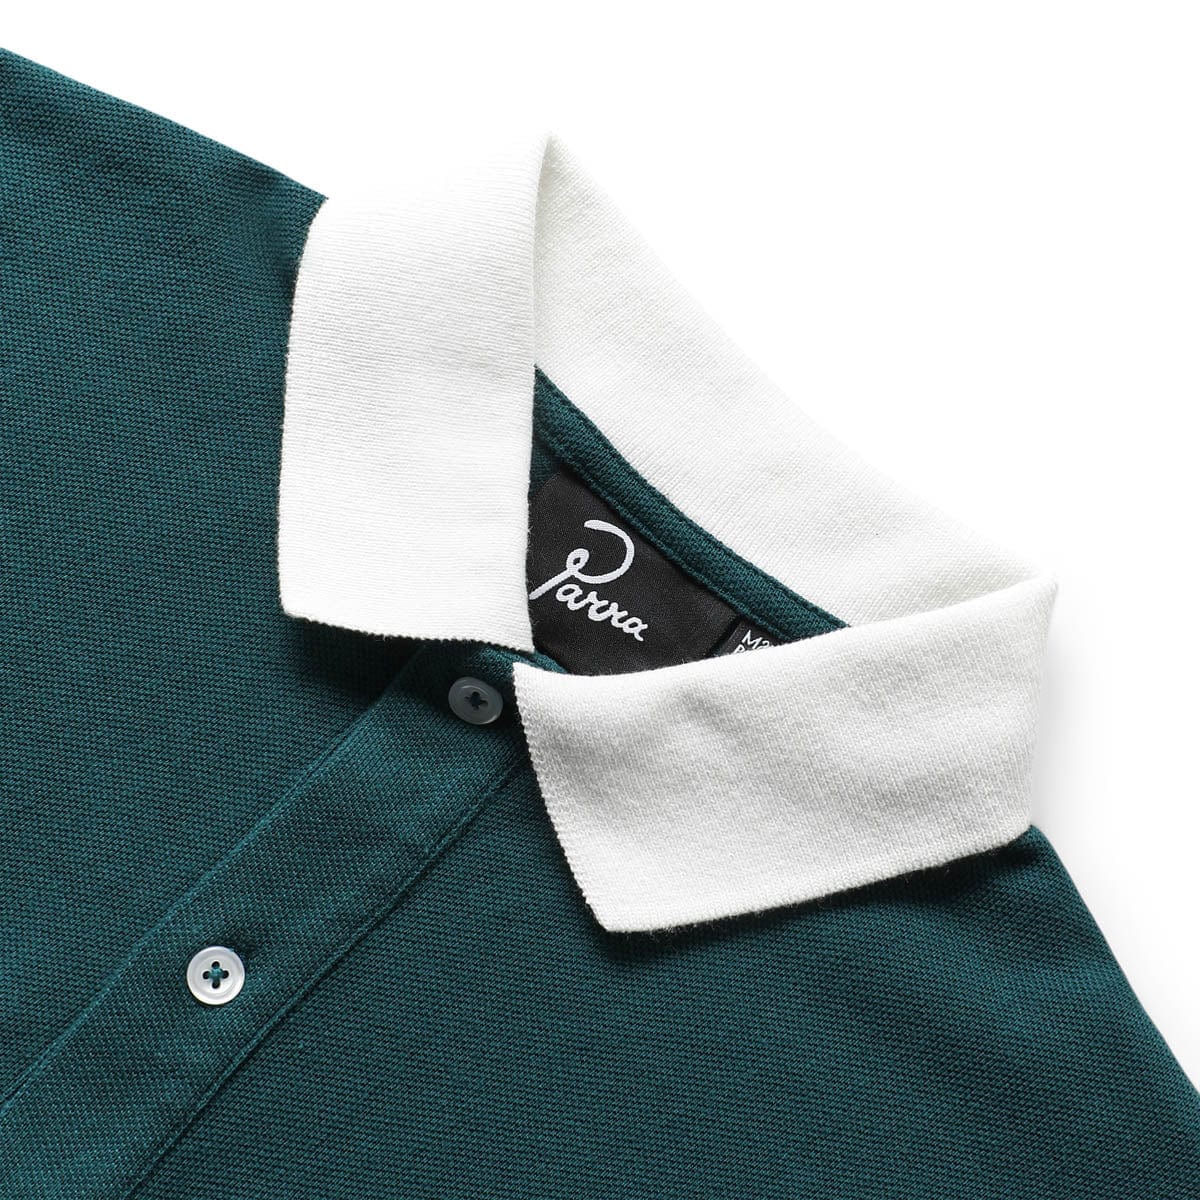 By Parra Shirts WINGED LOGO POLO SHIRT